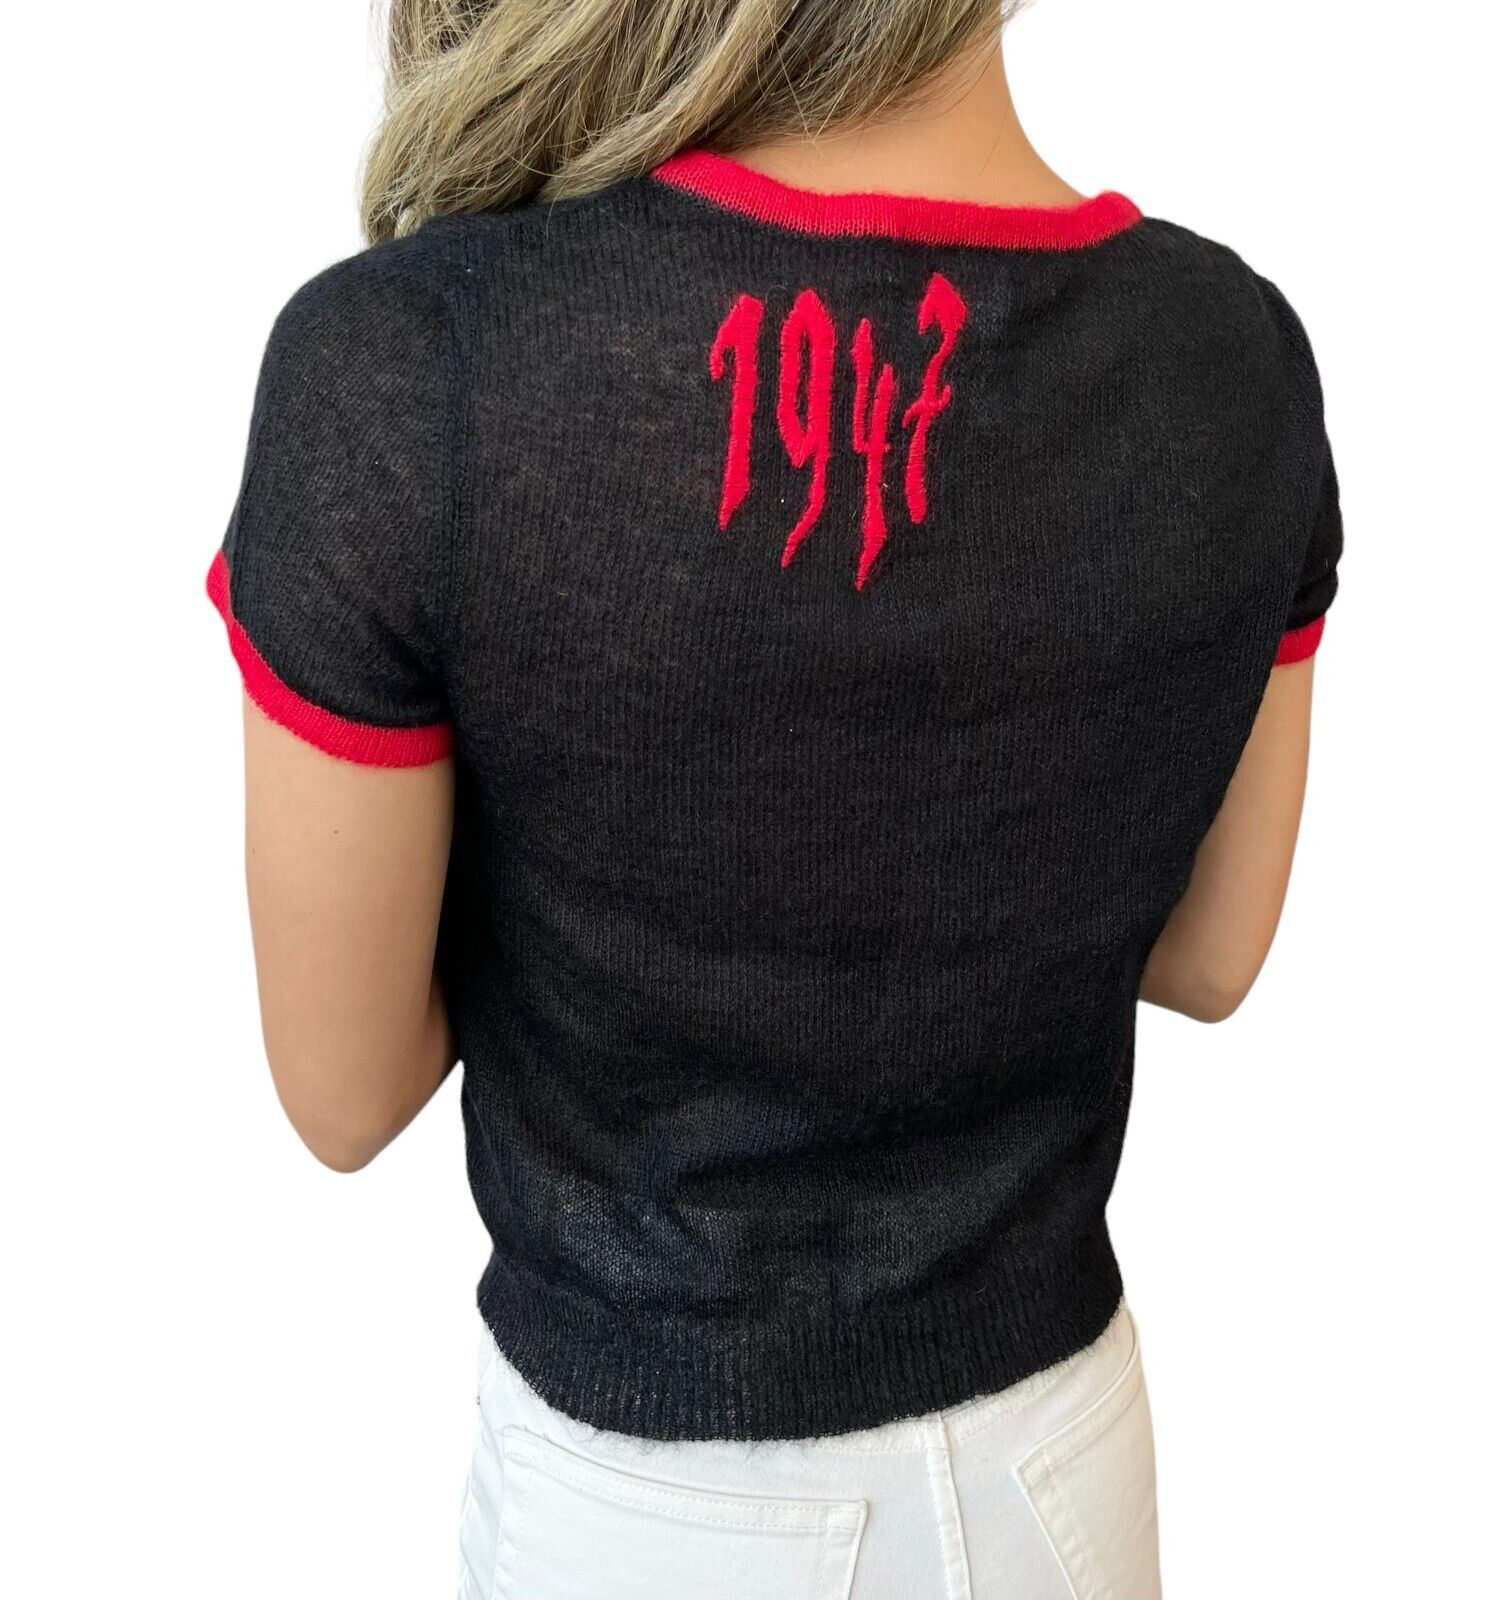 Christian Dior Vintage Calligraphy Gothic Knit Top #38 1974 Black Mohair Rank AB